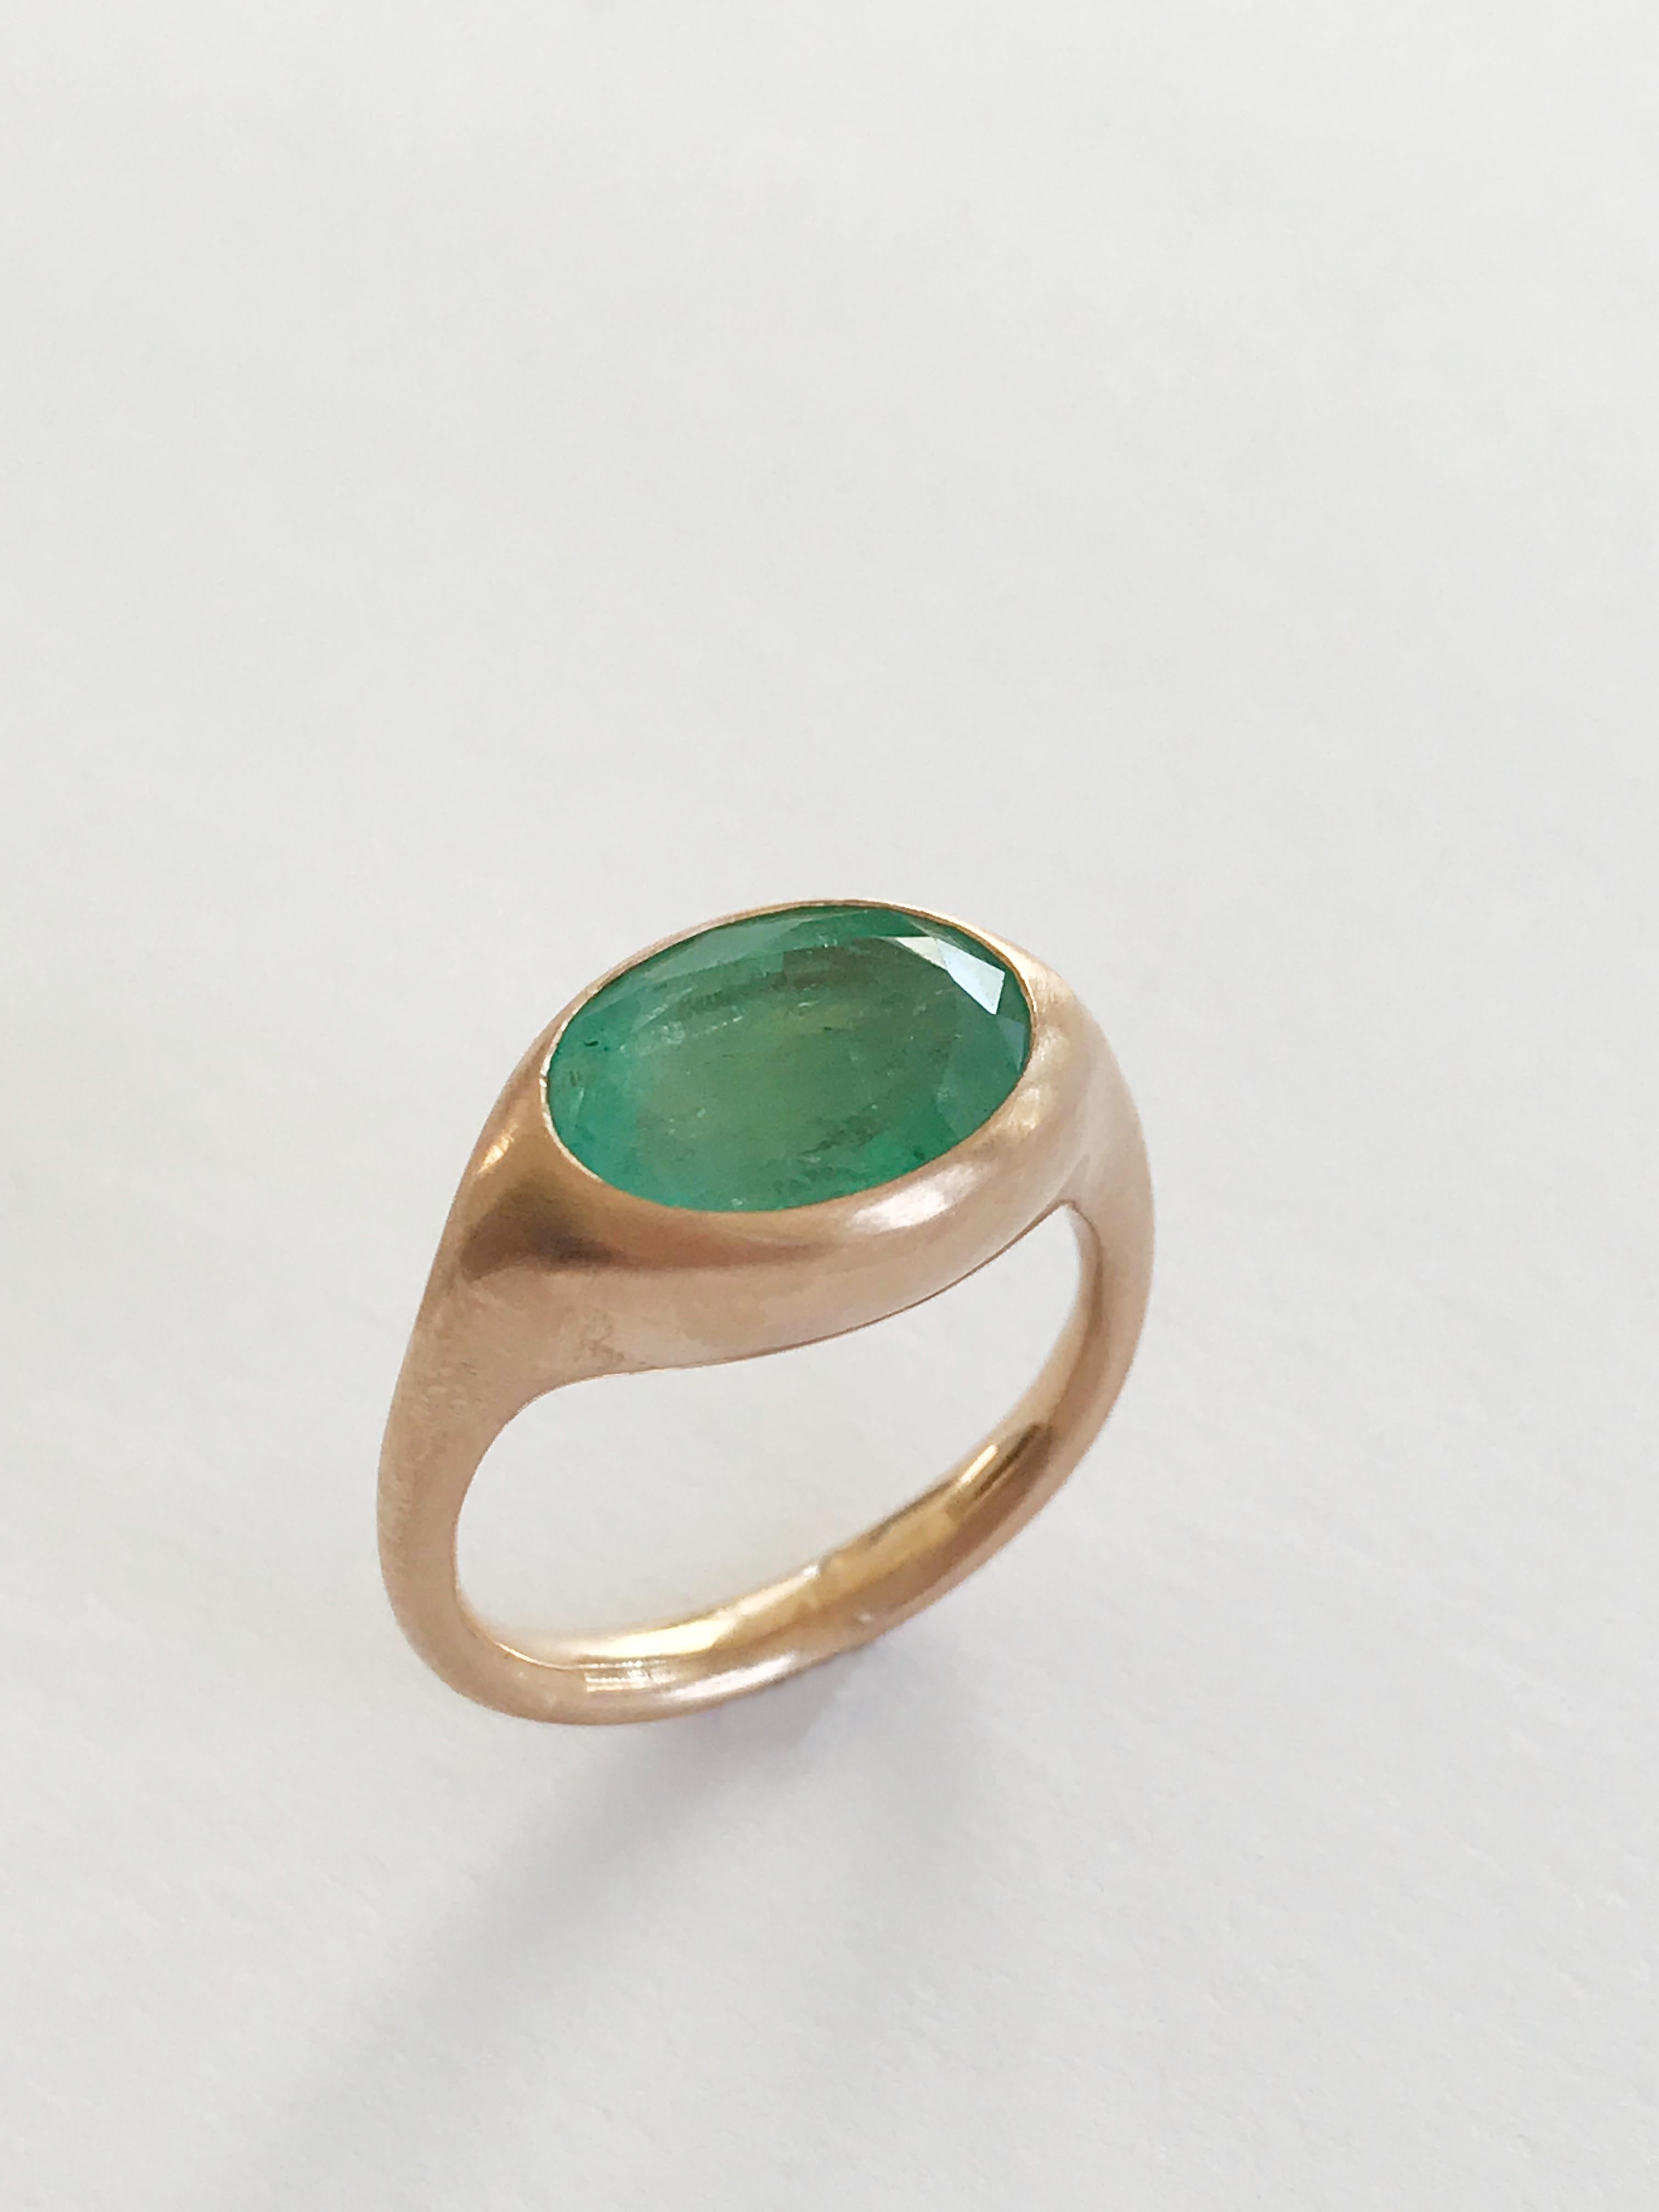 Dalben design One of a Kind 18k rose gold matte finishing ring with a light green 3,44 carat bezel-set oval faceted cut emerald. 
Ring size 7 USA - EU 54 re-sizable to most finger sizes. 
Bezel stone dimensions :
height 9,4 mm
width 12,9 mm
The ring